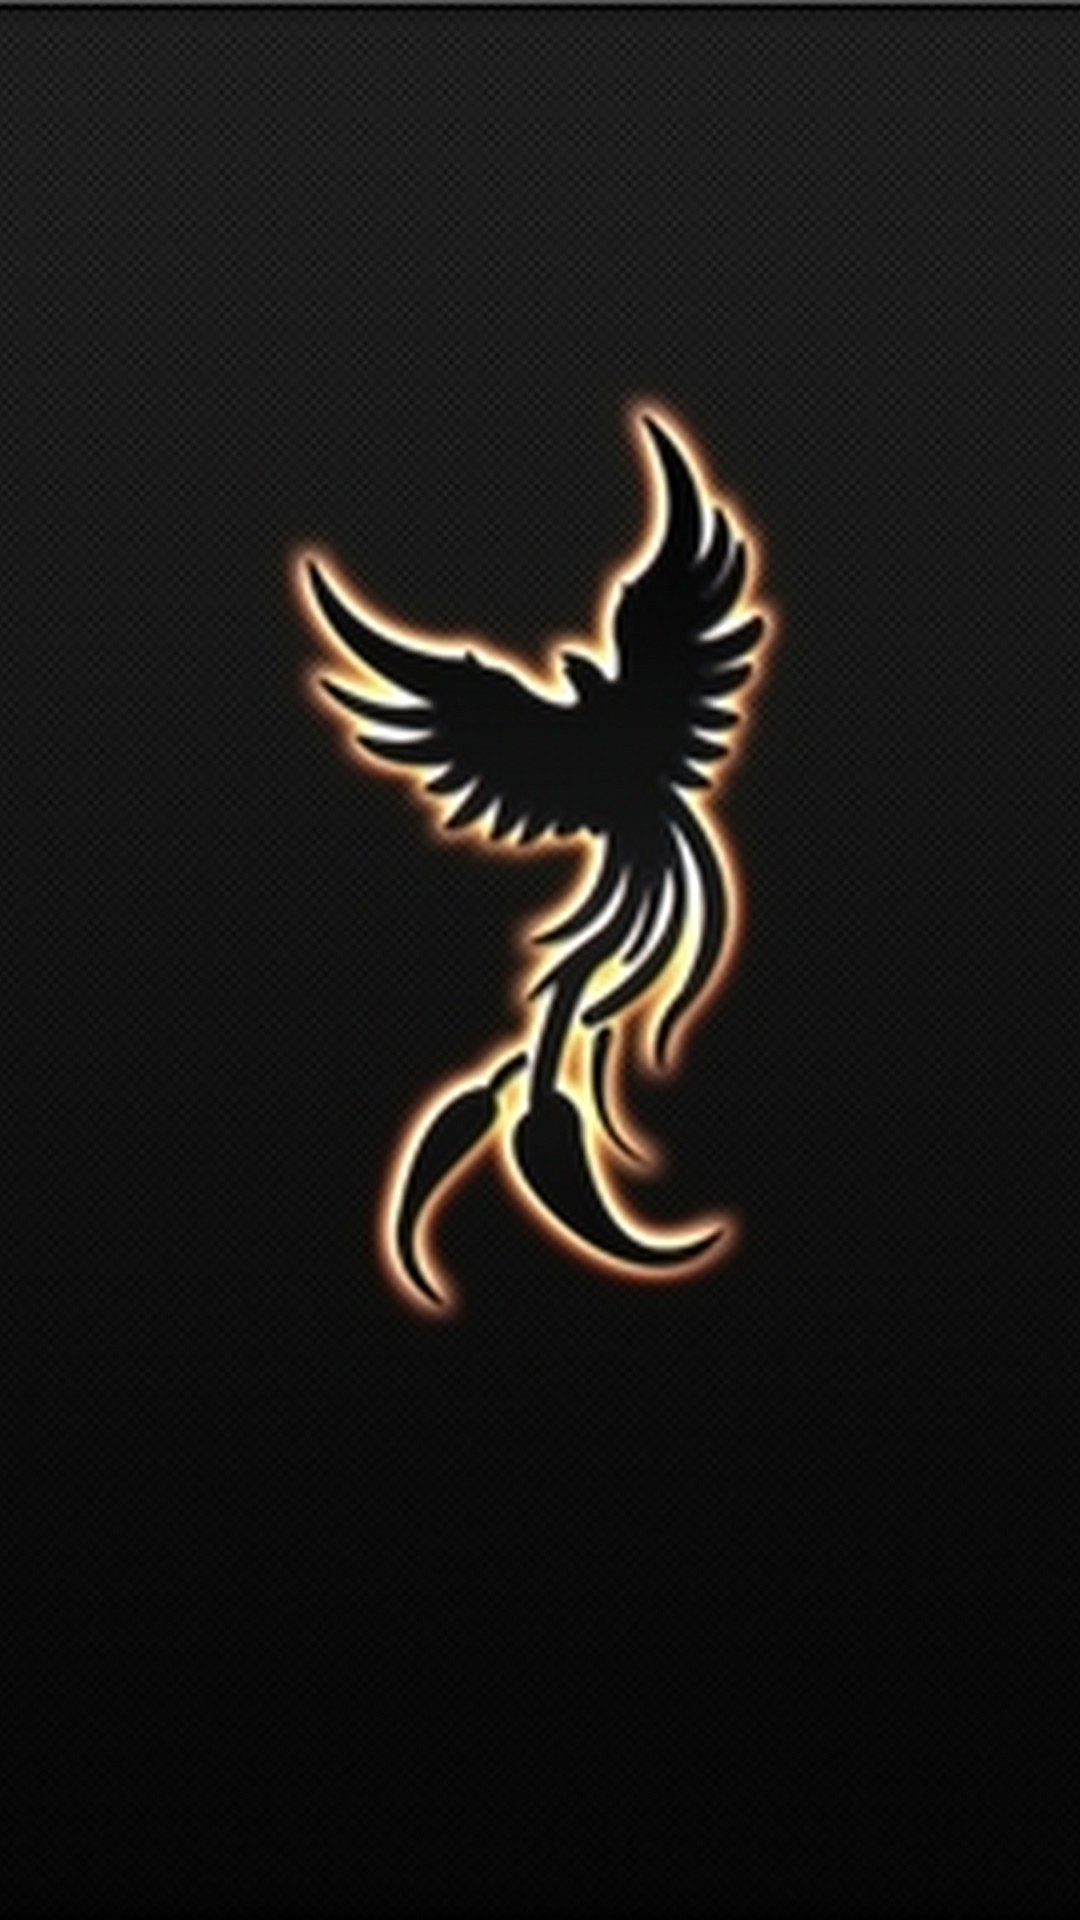 Phoenix Bird Images Wallpaper For Android with resolution 1080X1920 pixel. You can make this wallpaper for your Android backgrounds, Tablet, Smartphones Screensavers and Mobile Phone Lock Screen